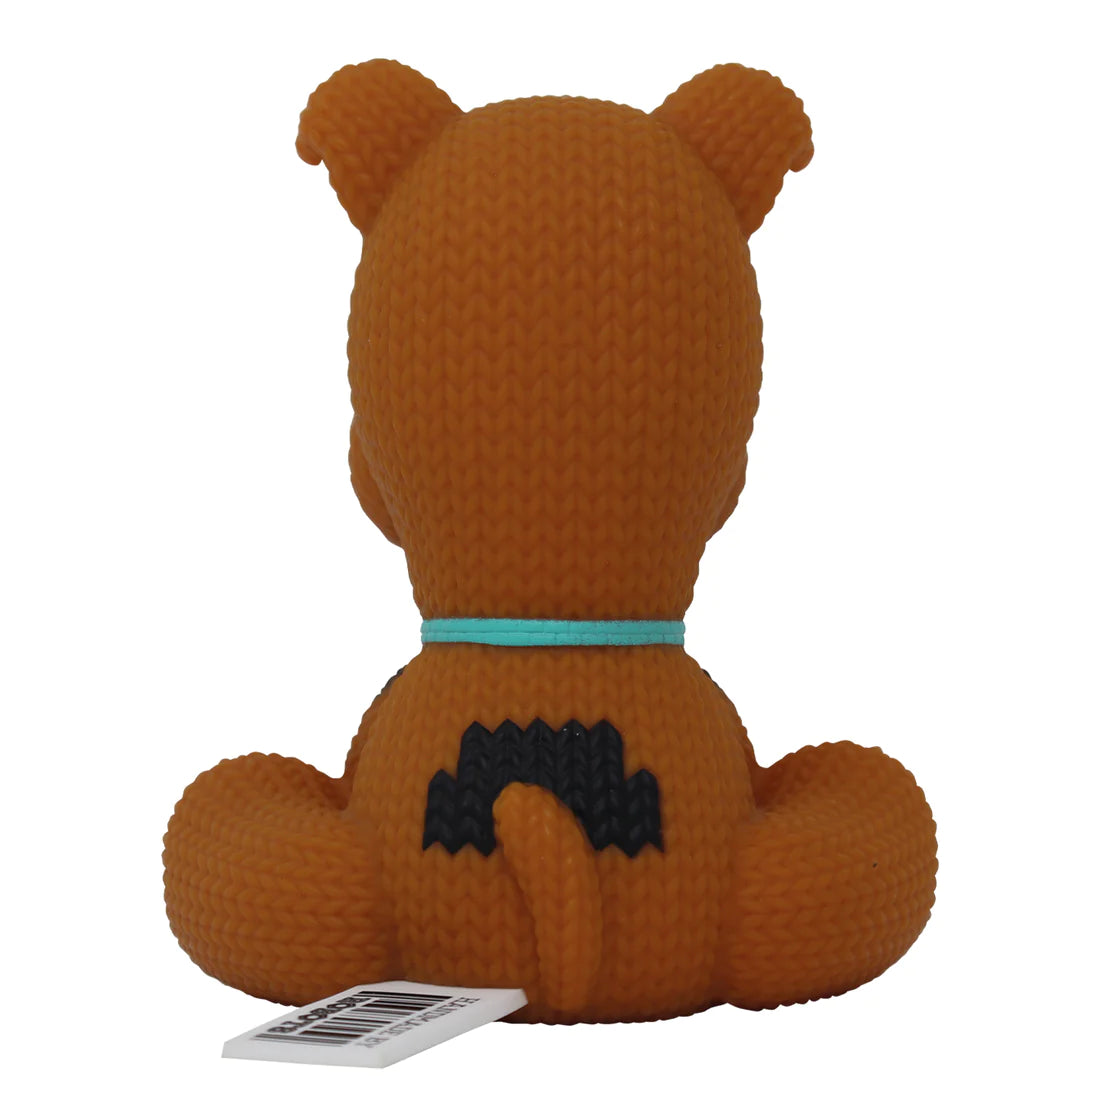 Scooby -Doo - Knit Series